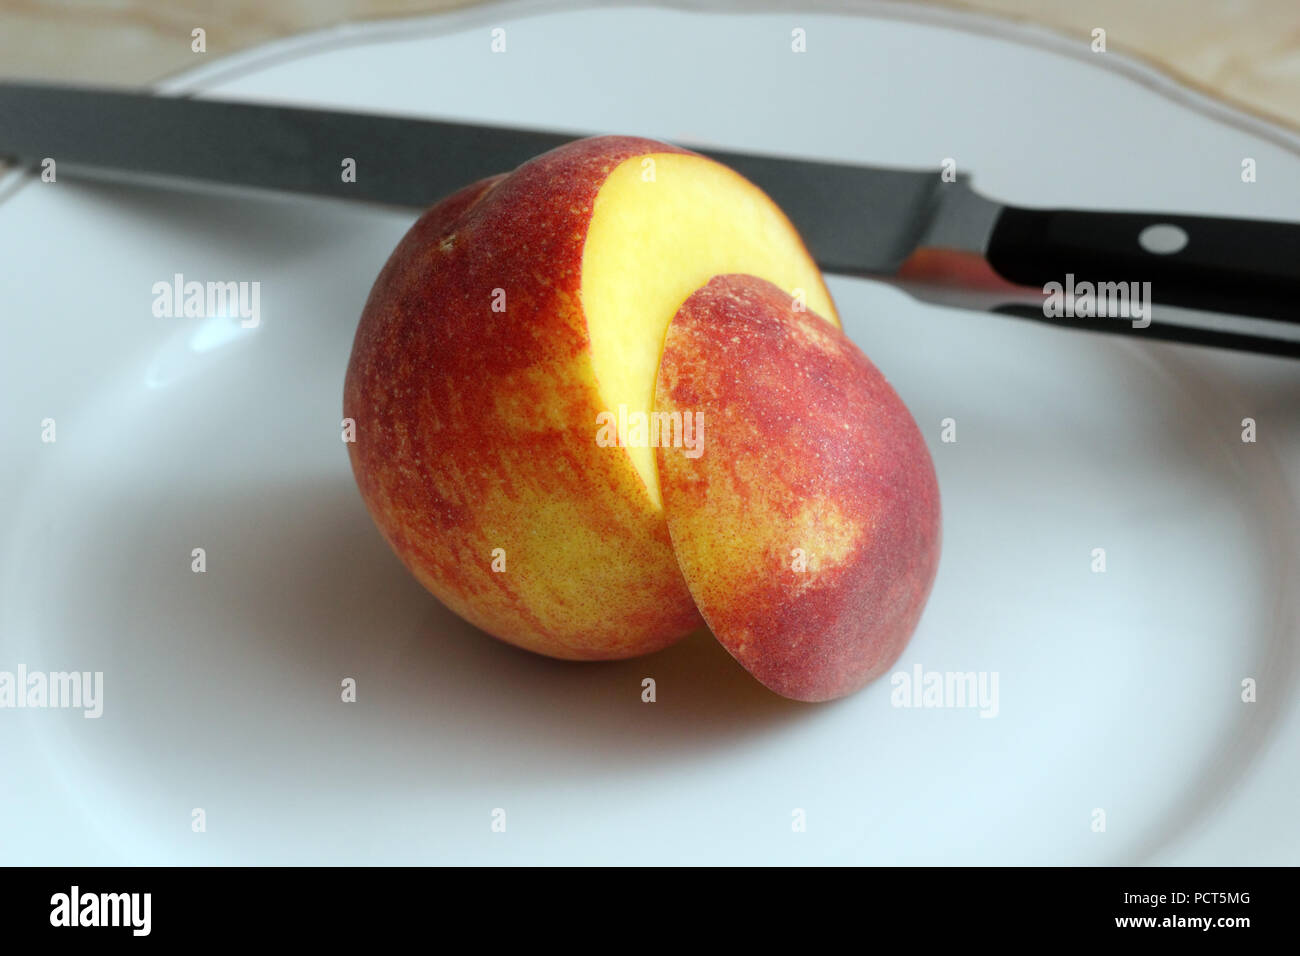 Sliced peach and knife on the white plate photo Stock Photo